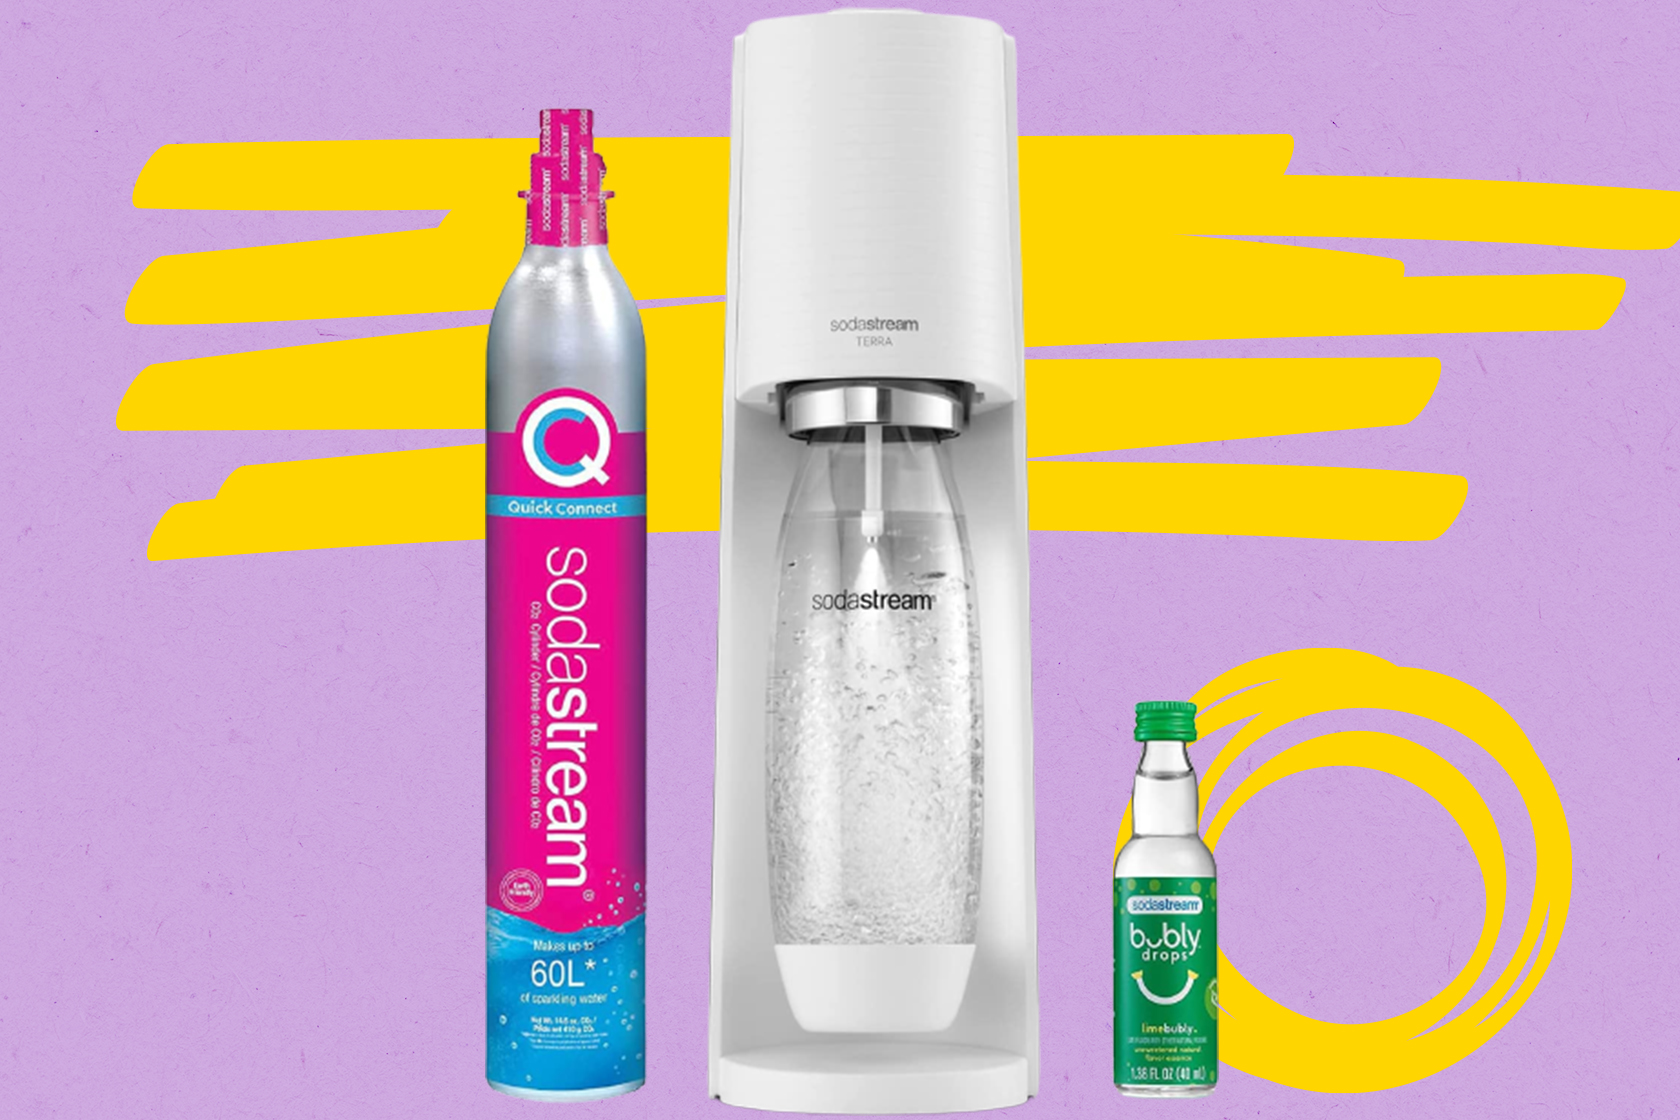 Save 31% on a SodaStream with this deal from